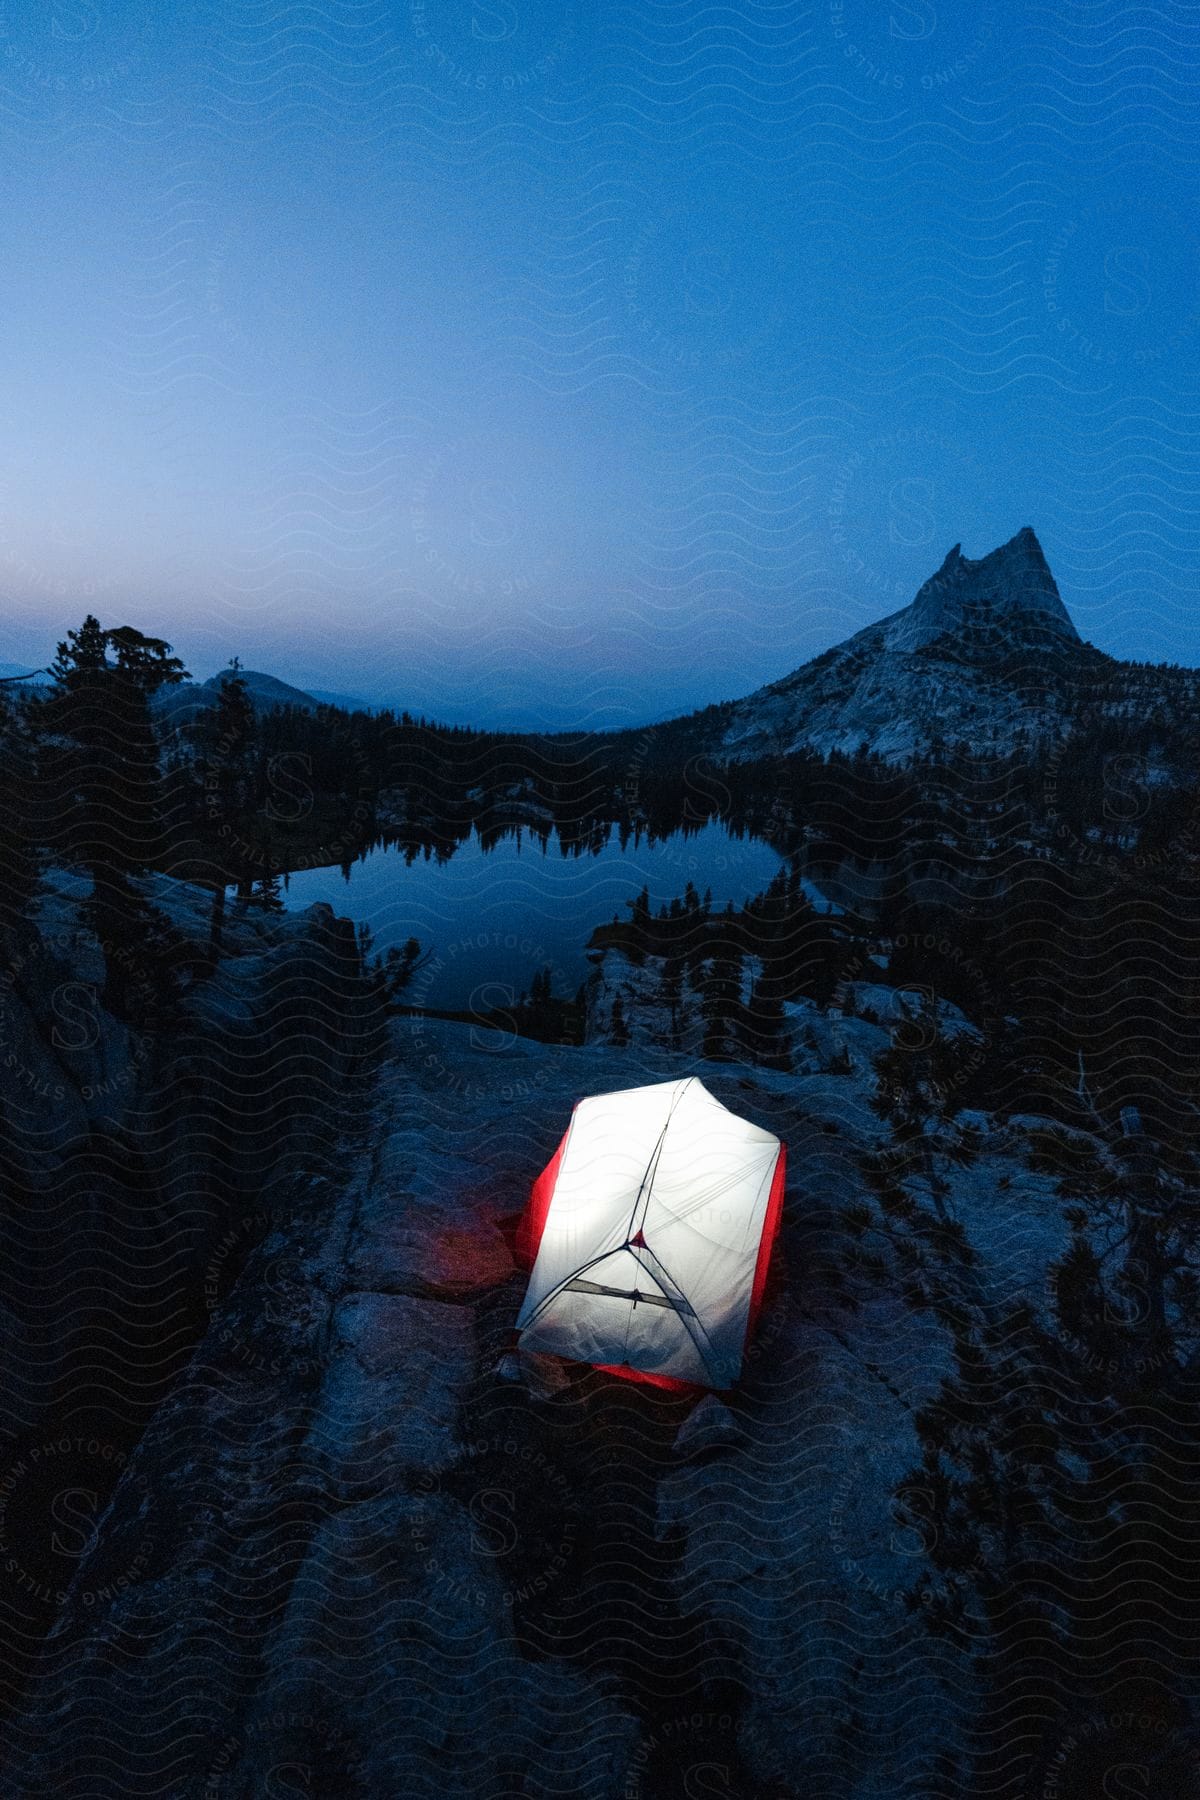 A tent is illuminated at night overlooking a small lake in a mountain valley